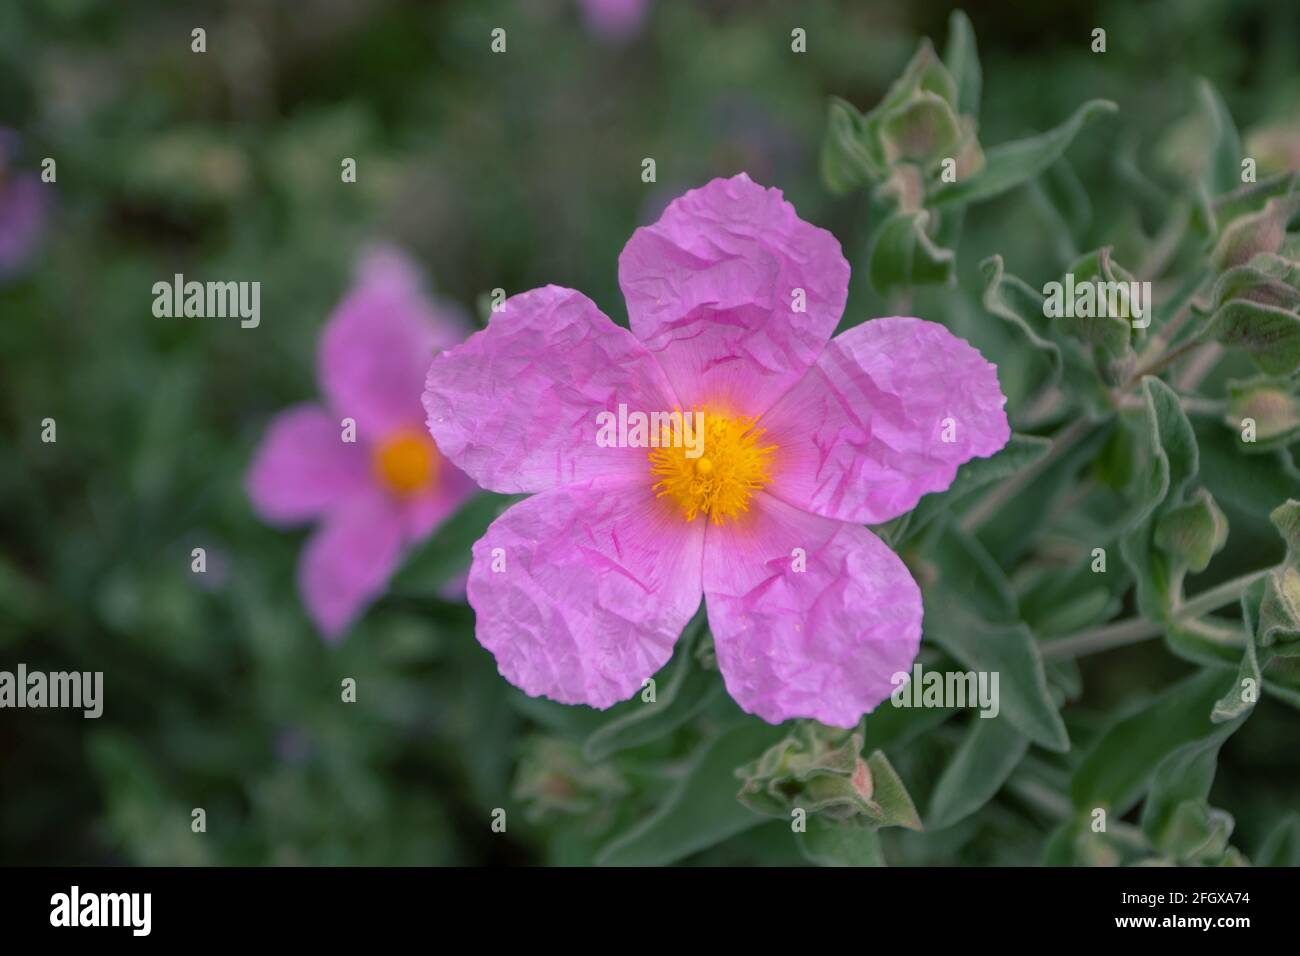 Cistus albidus pink flowers with bright yellow stamens and papery crumpled petals. Grey-leaved flowering shrub. Stock Photo